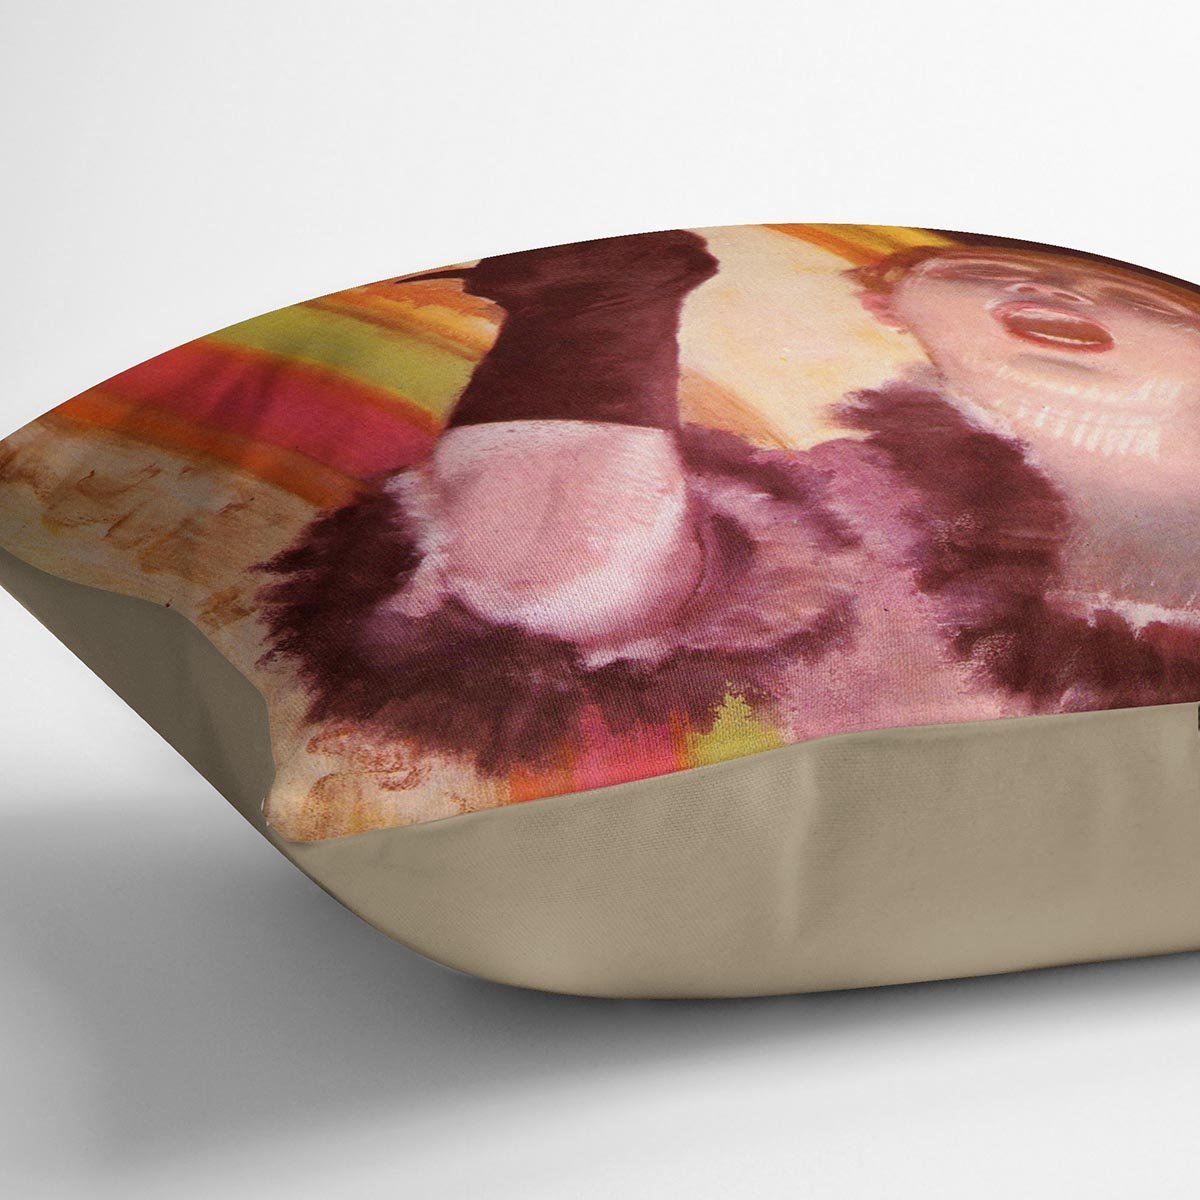 The singer with the glove by Degas Cushion